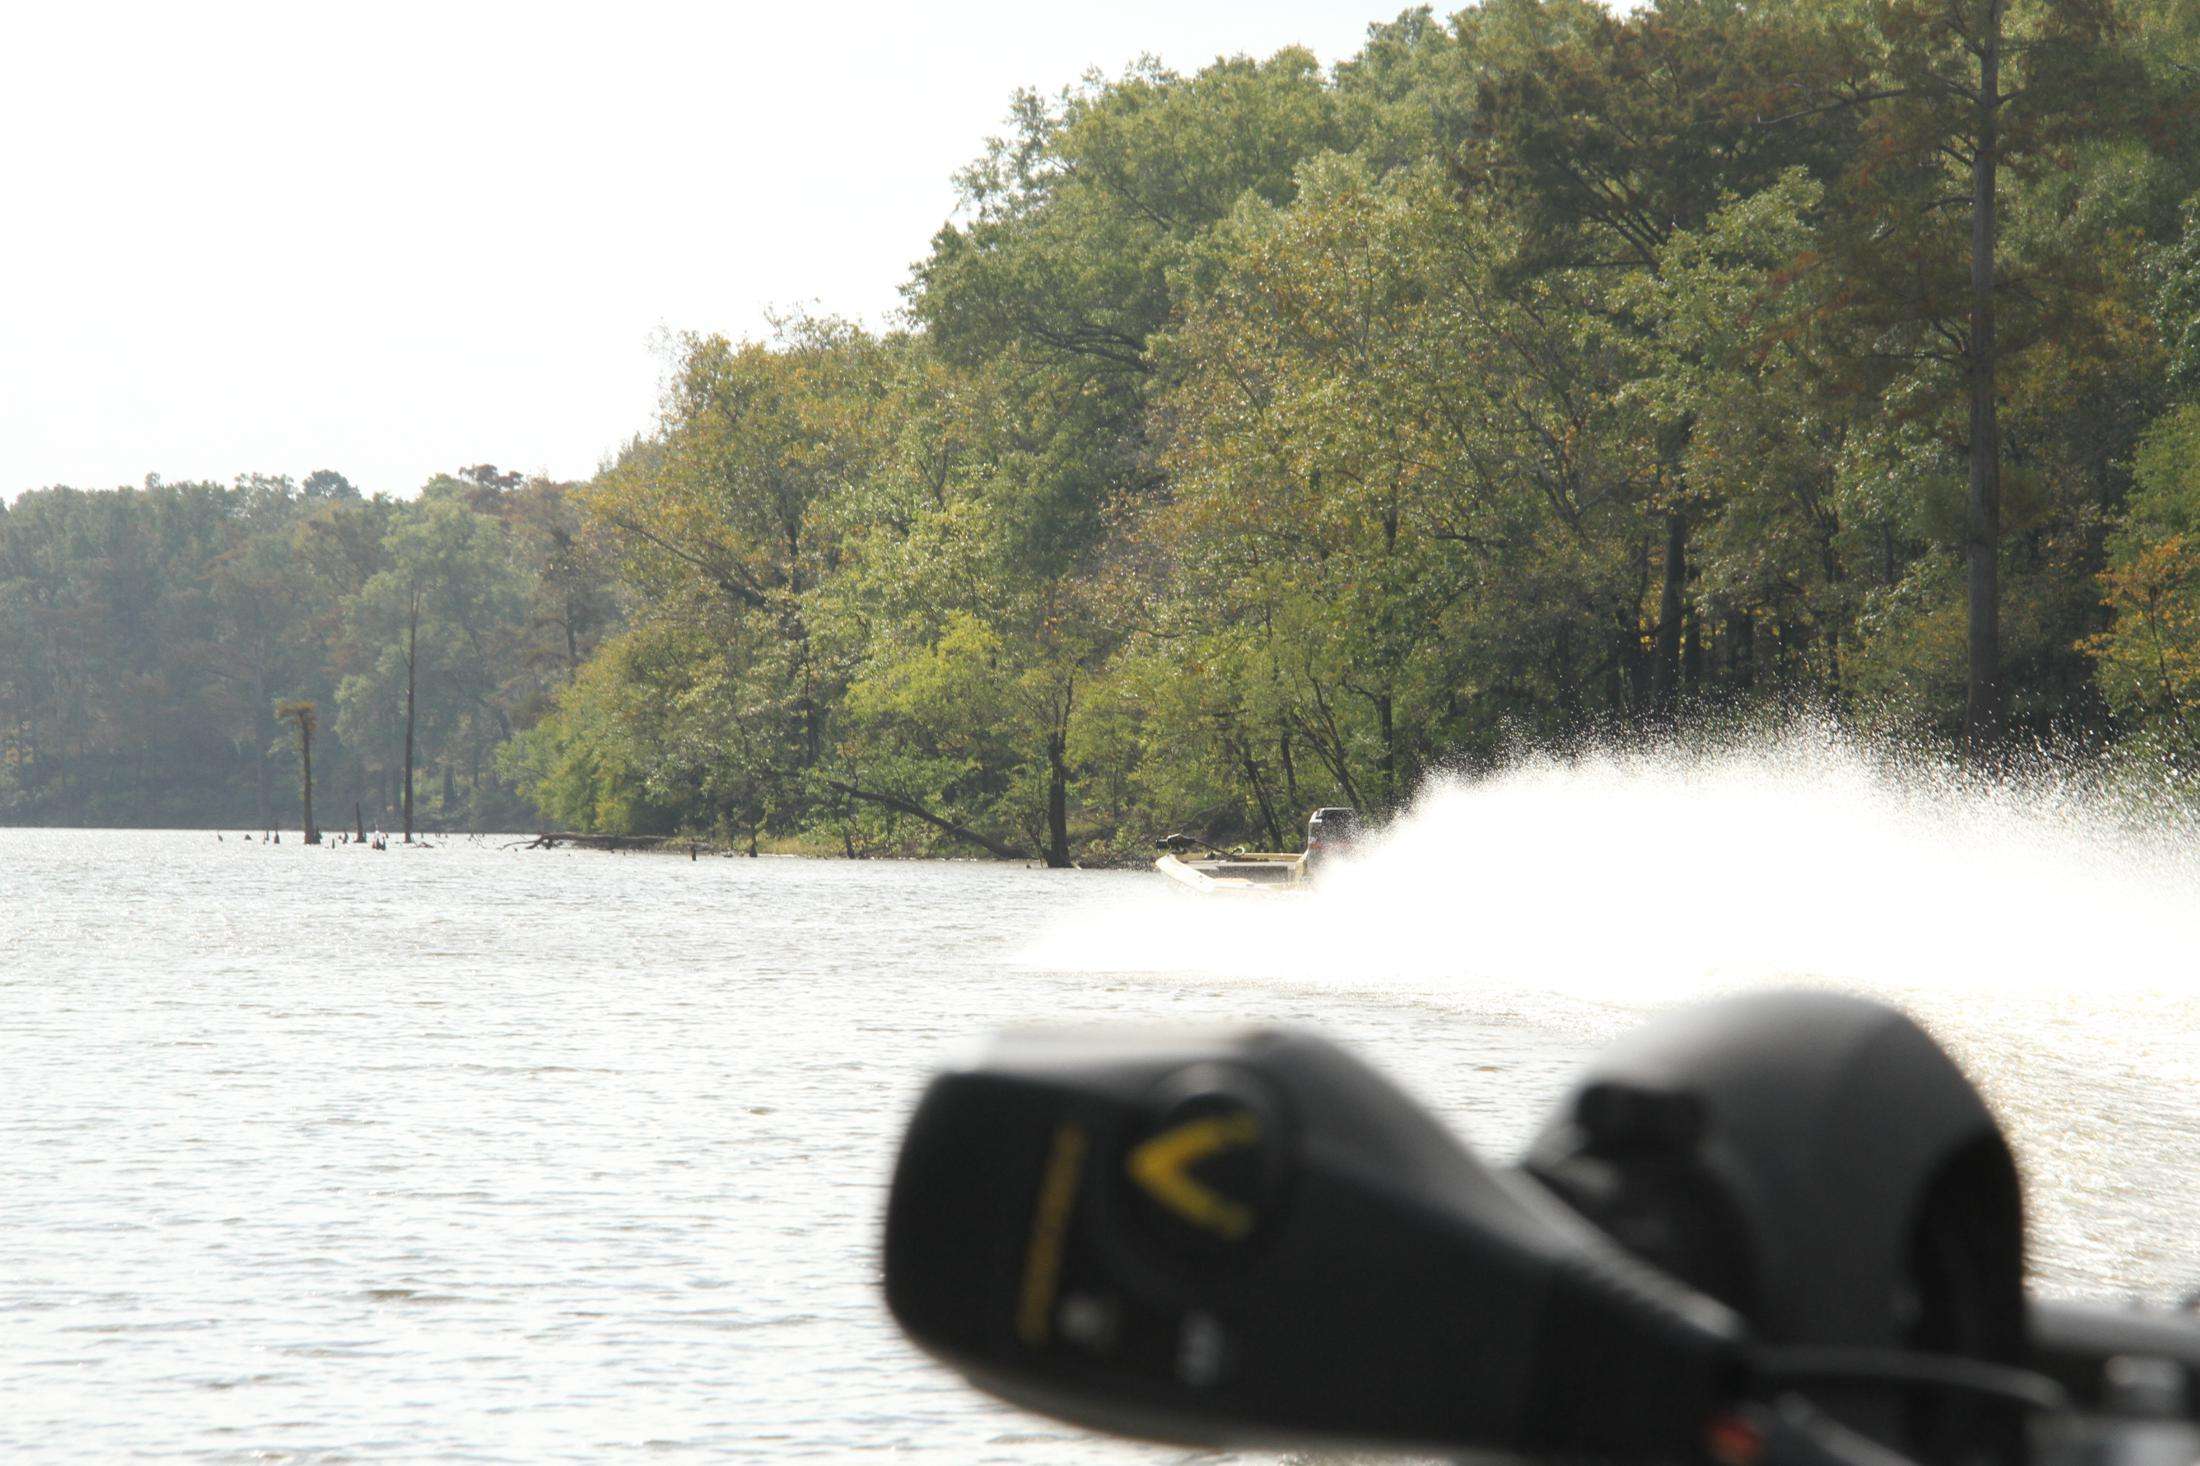 As we continue up the river, we see another competitor burning gas to his next spot.